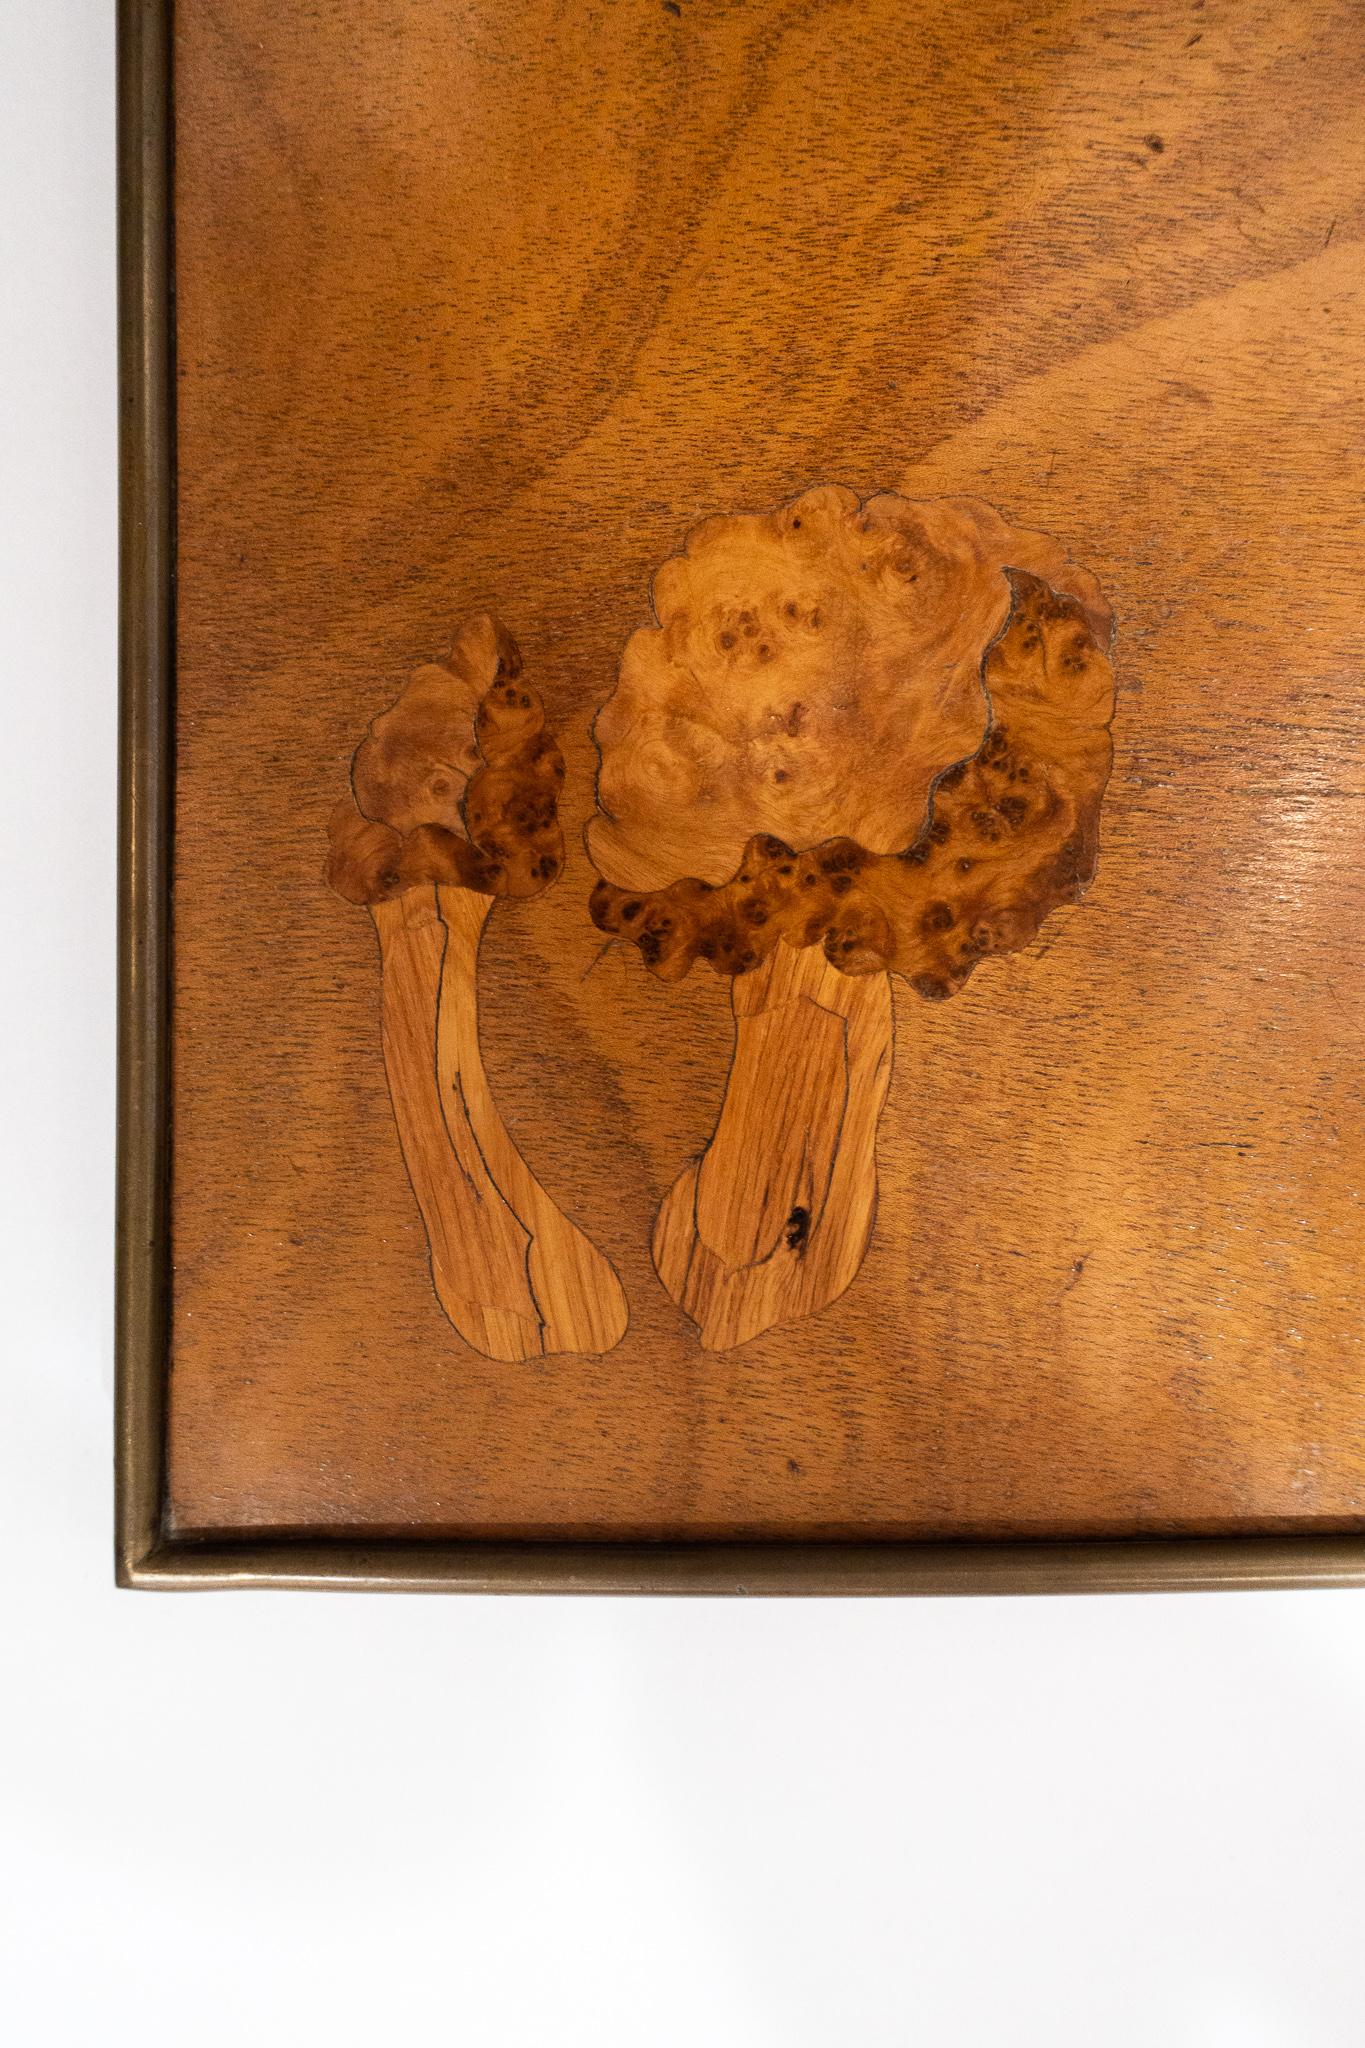 Inlay Inlaid Wooden Panel with Mushrooms and a Butterfly, Signed Christian Dior, Paris